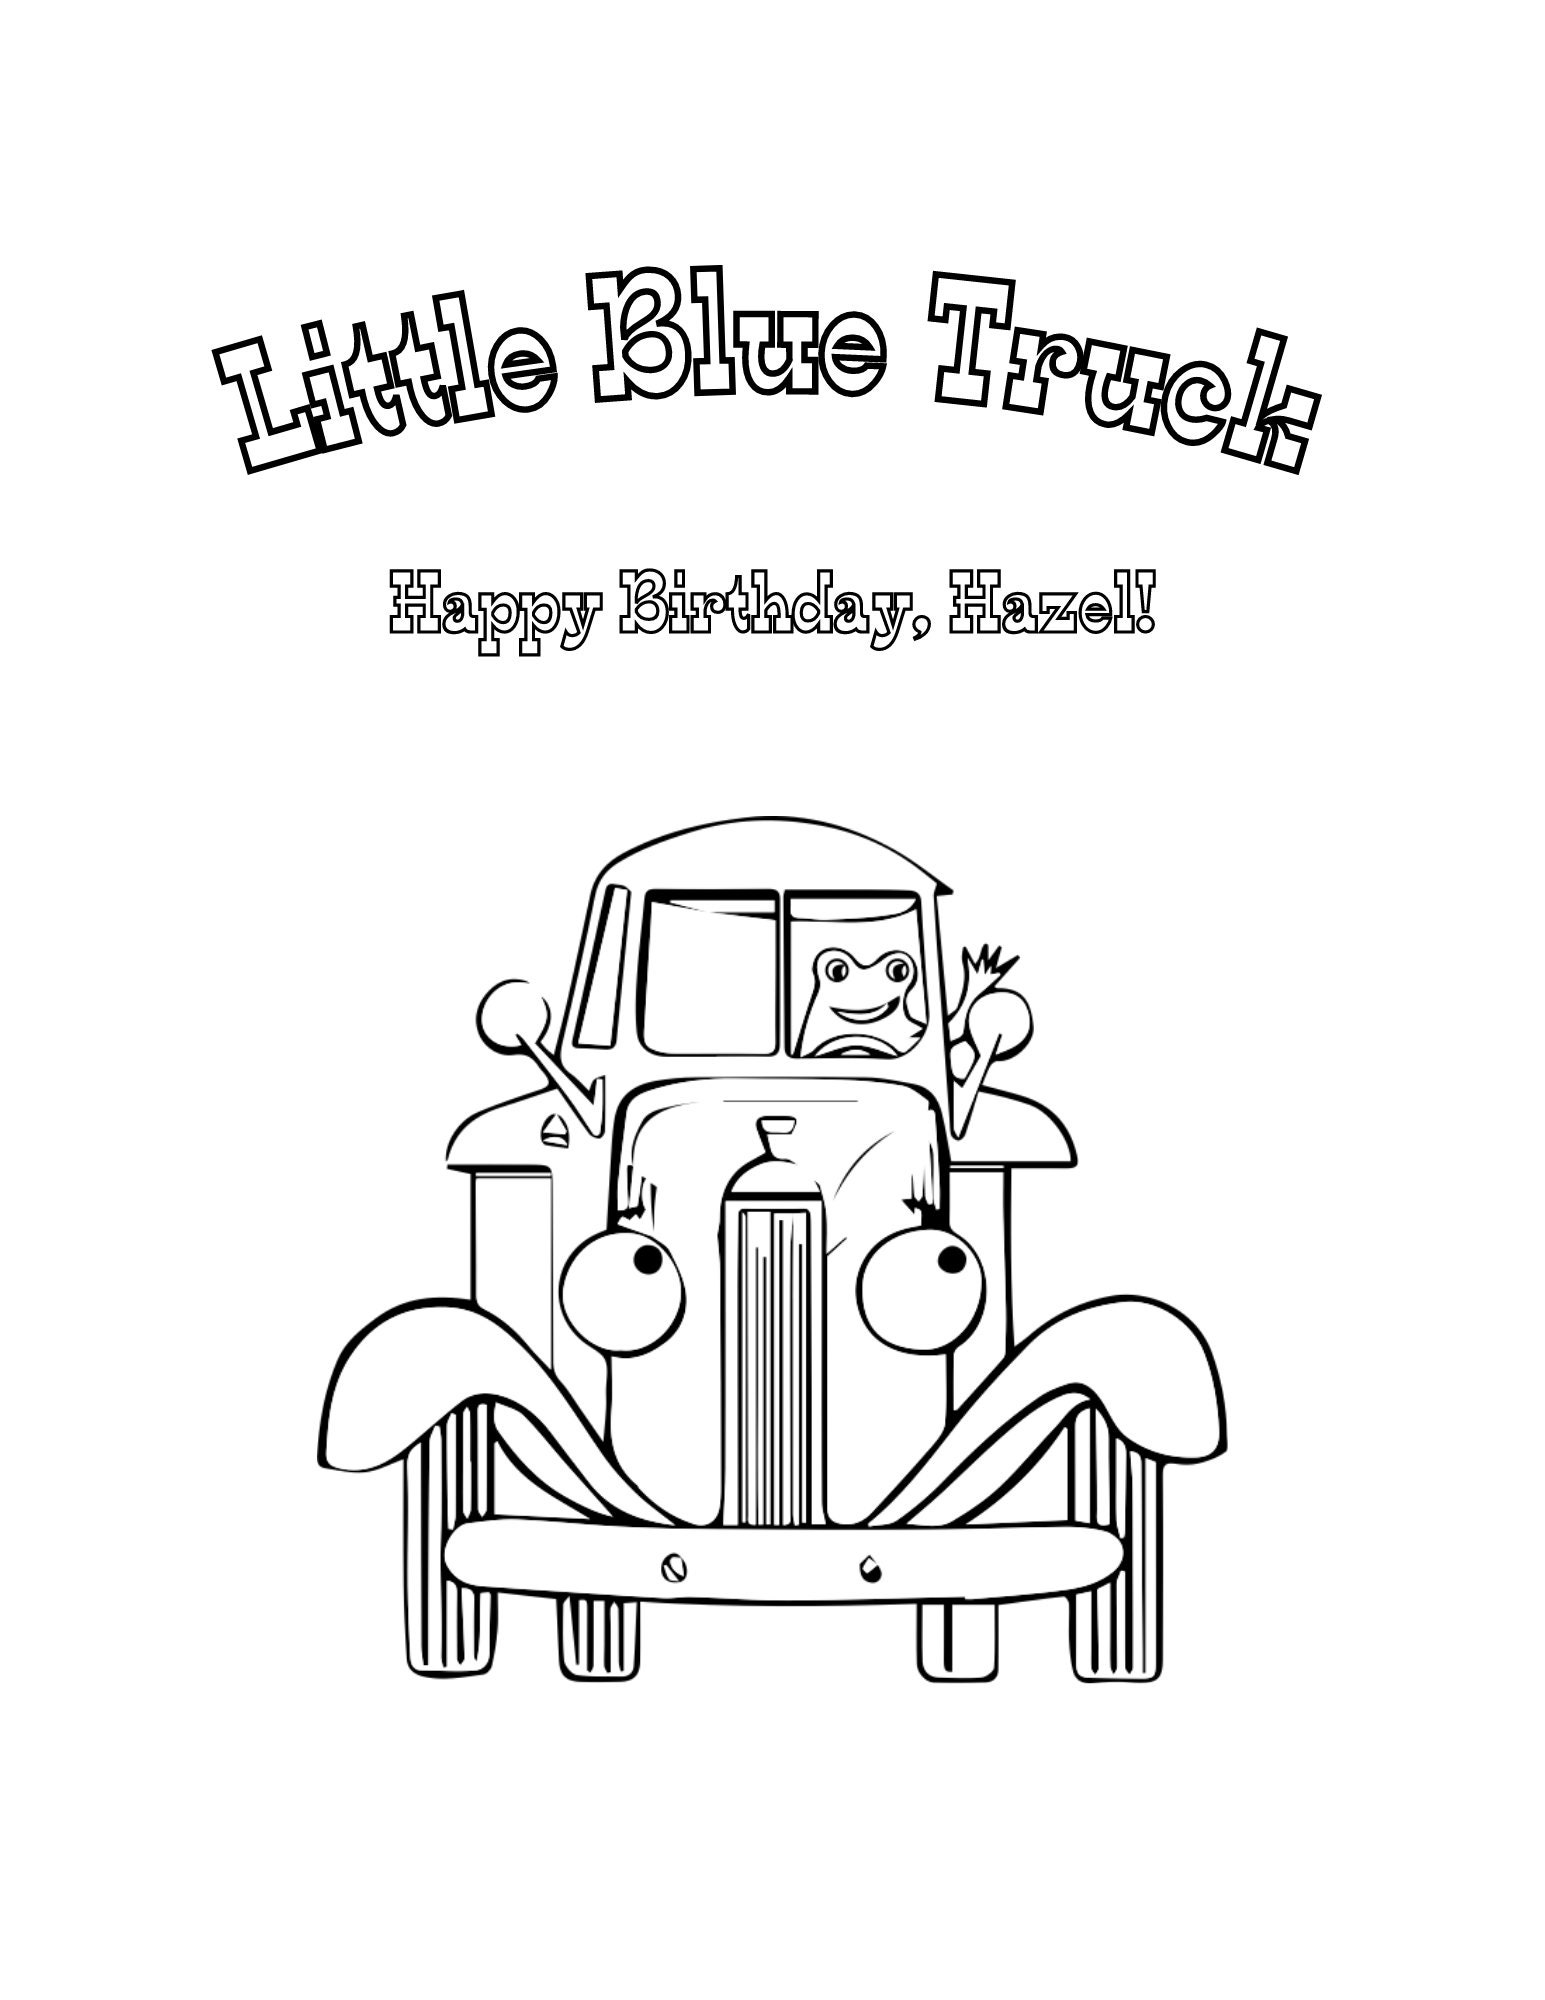 Editable personalized little blue truck coloring bookparty favor